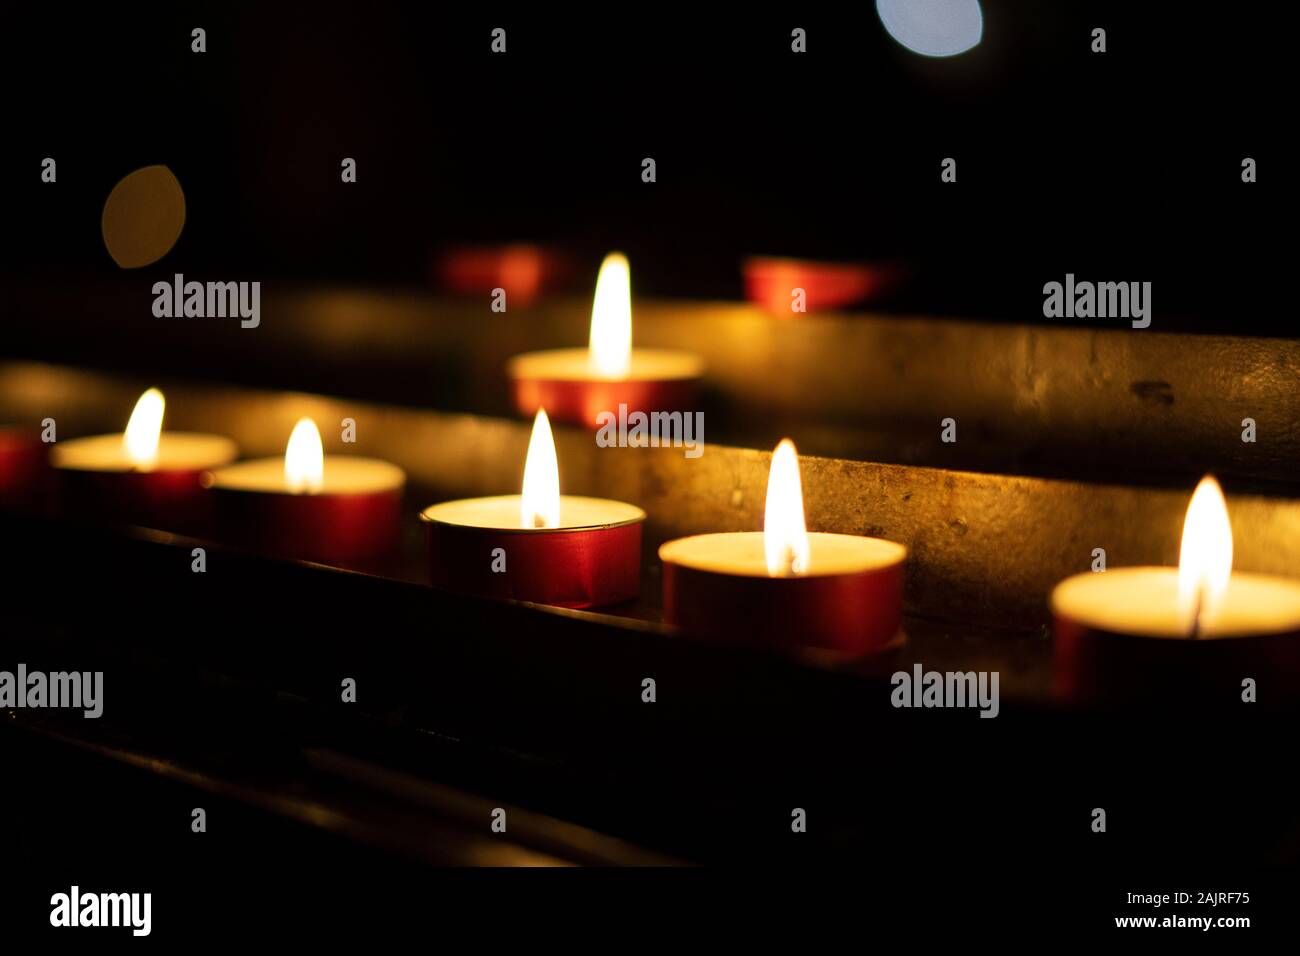 Candles lit red during a session of spiritualism. Concept of occultism, mysticism and black magic. Stock Photo